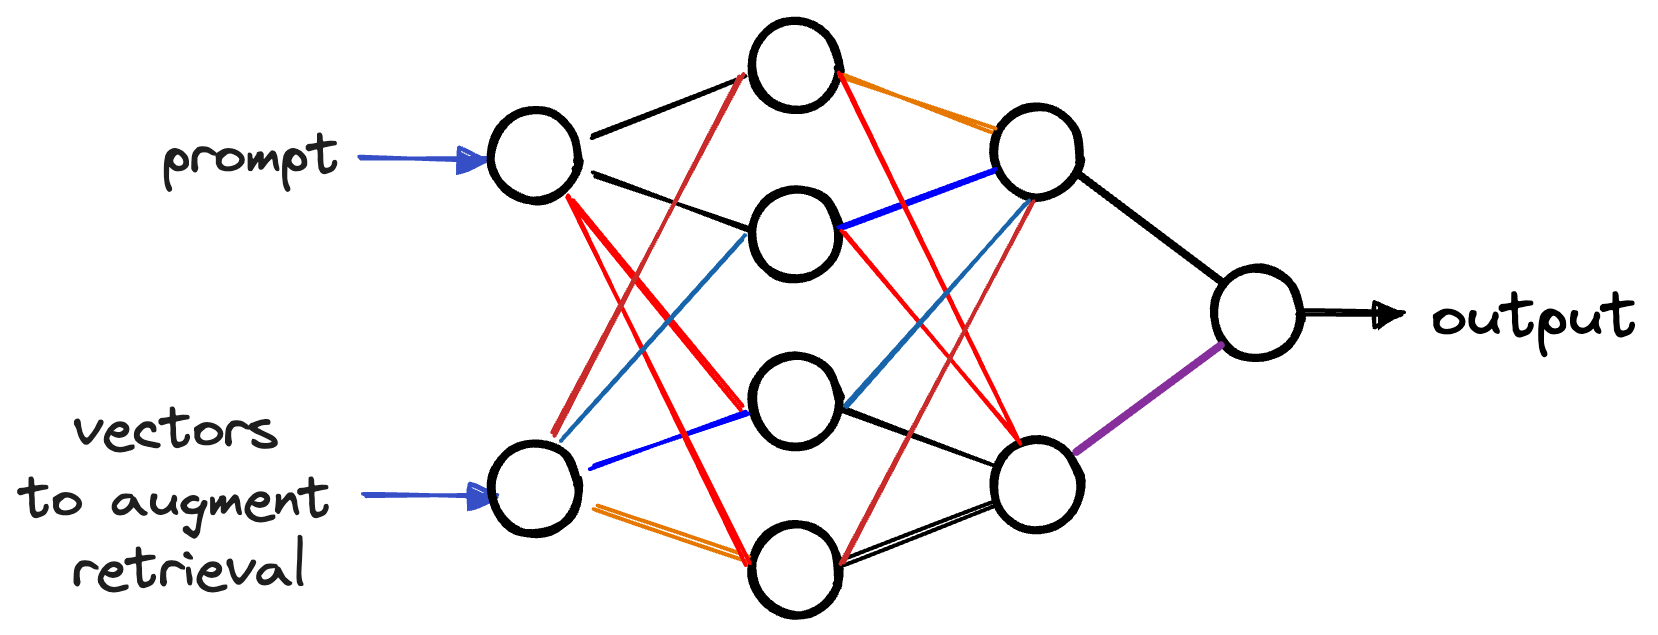 Diagram representing a neural network with inputs of a prompt and vectors to augment retrieval, then passing through a bunch of circles to represent linked neurons, emitting a single output.